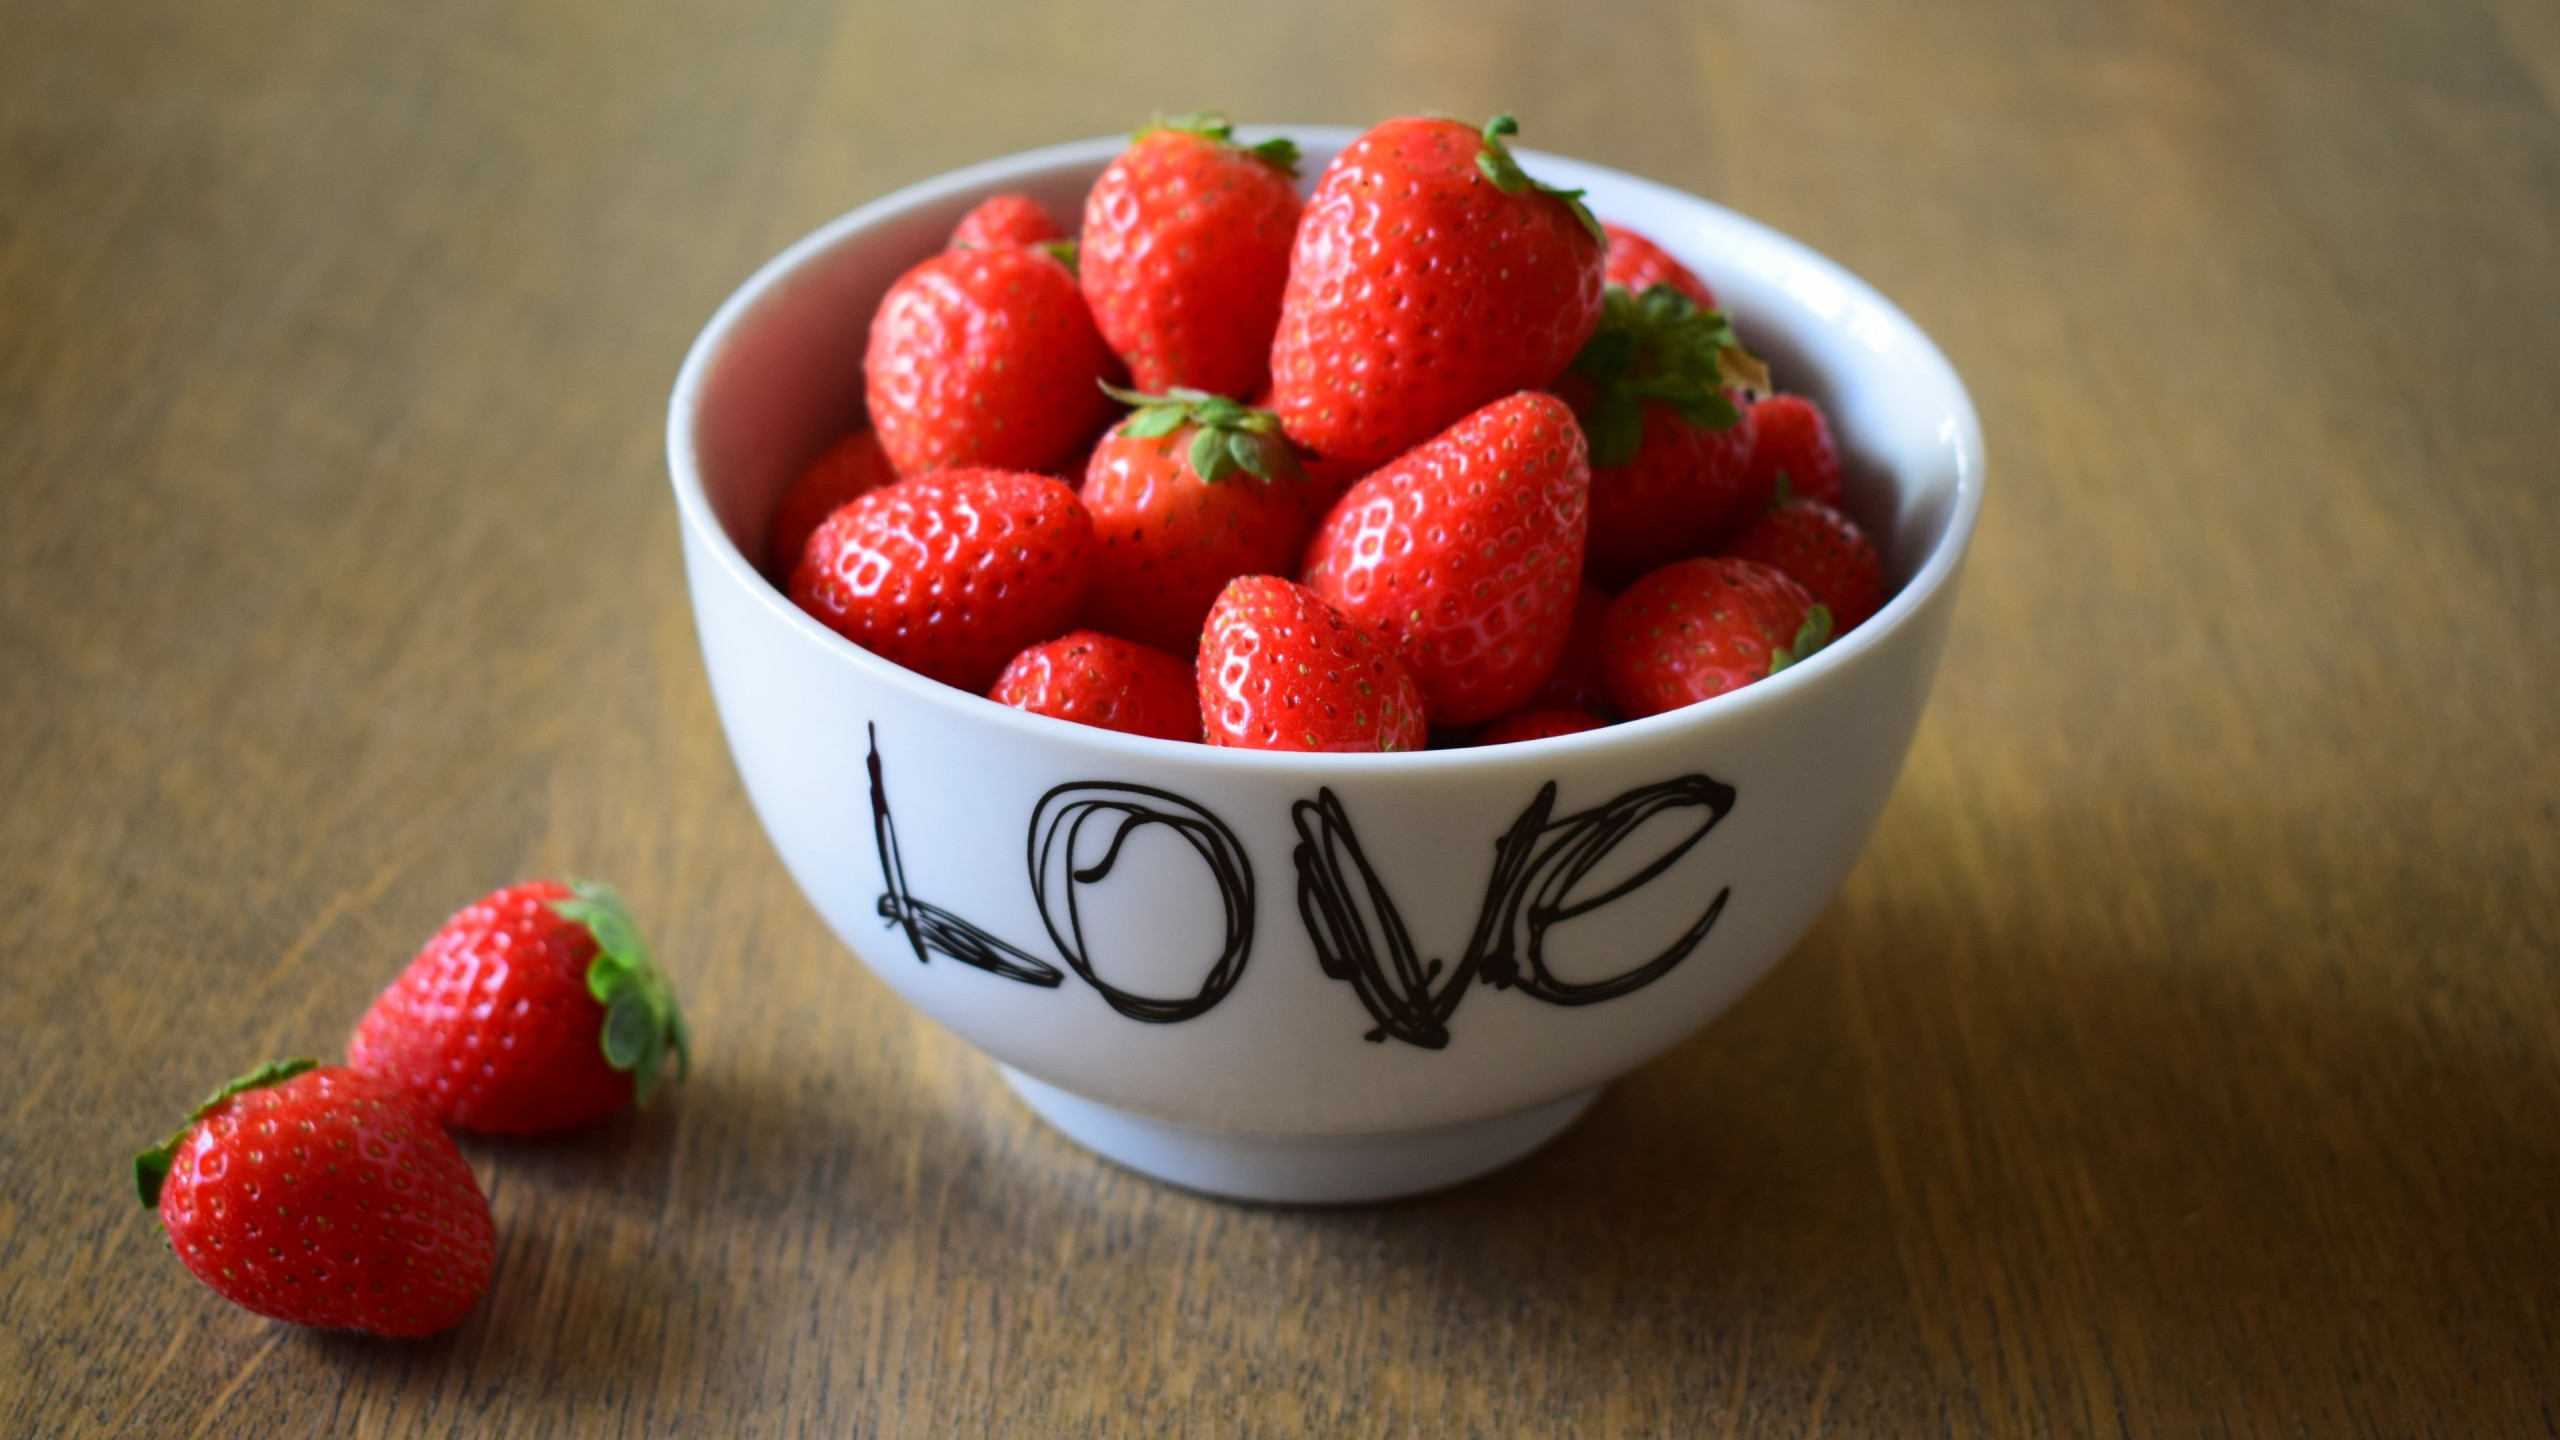 Strawberries with love wallpaper 2560x1440